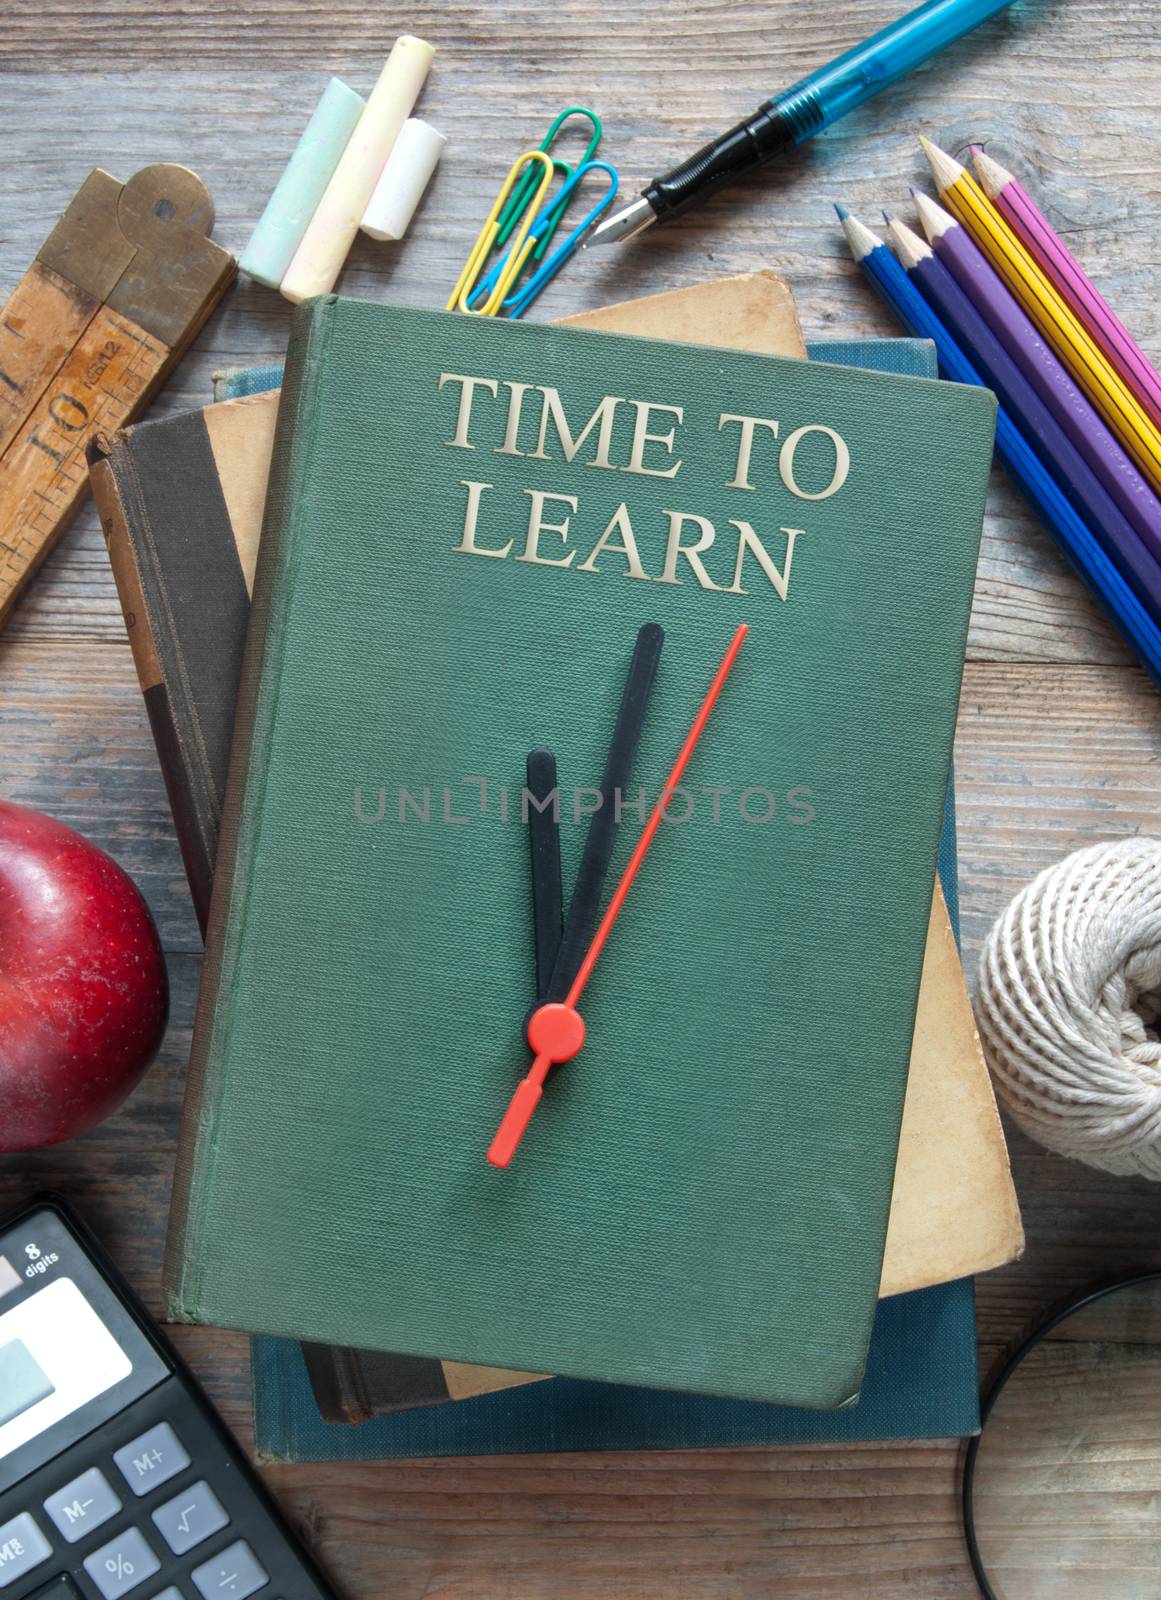 Time to learn clock book cover  by unikpix